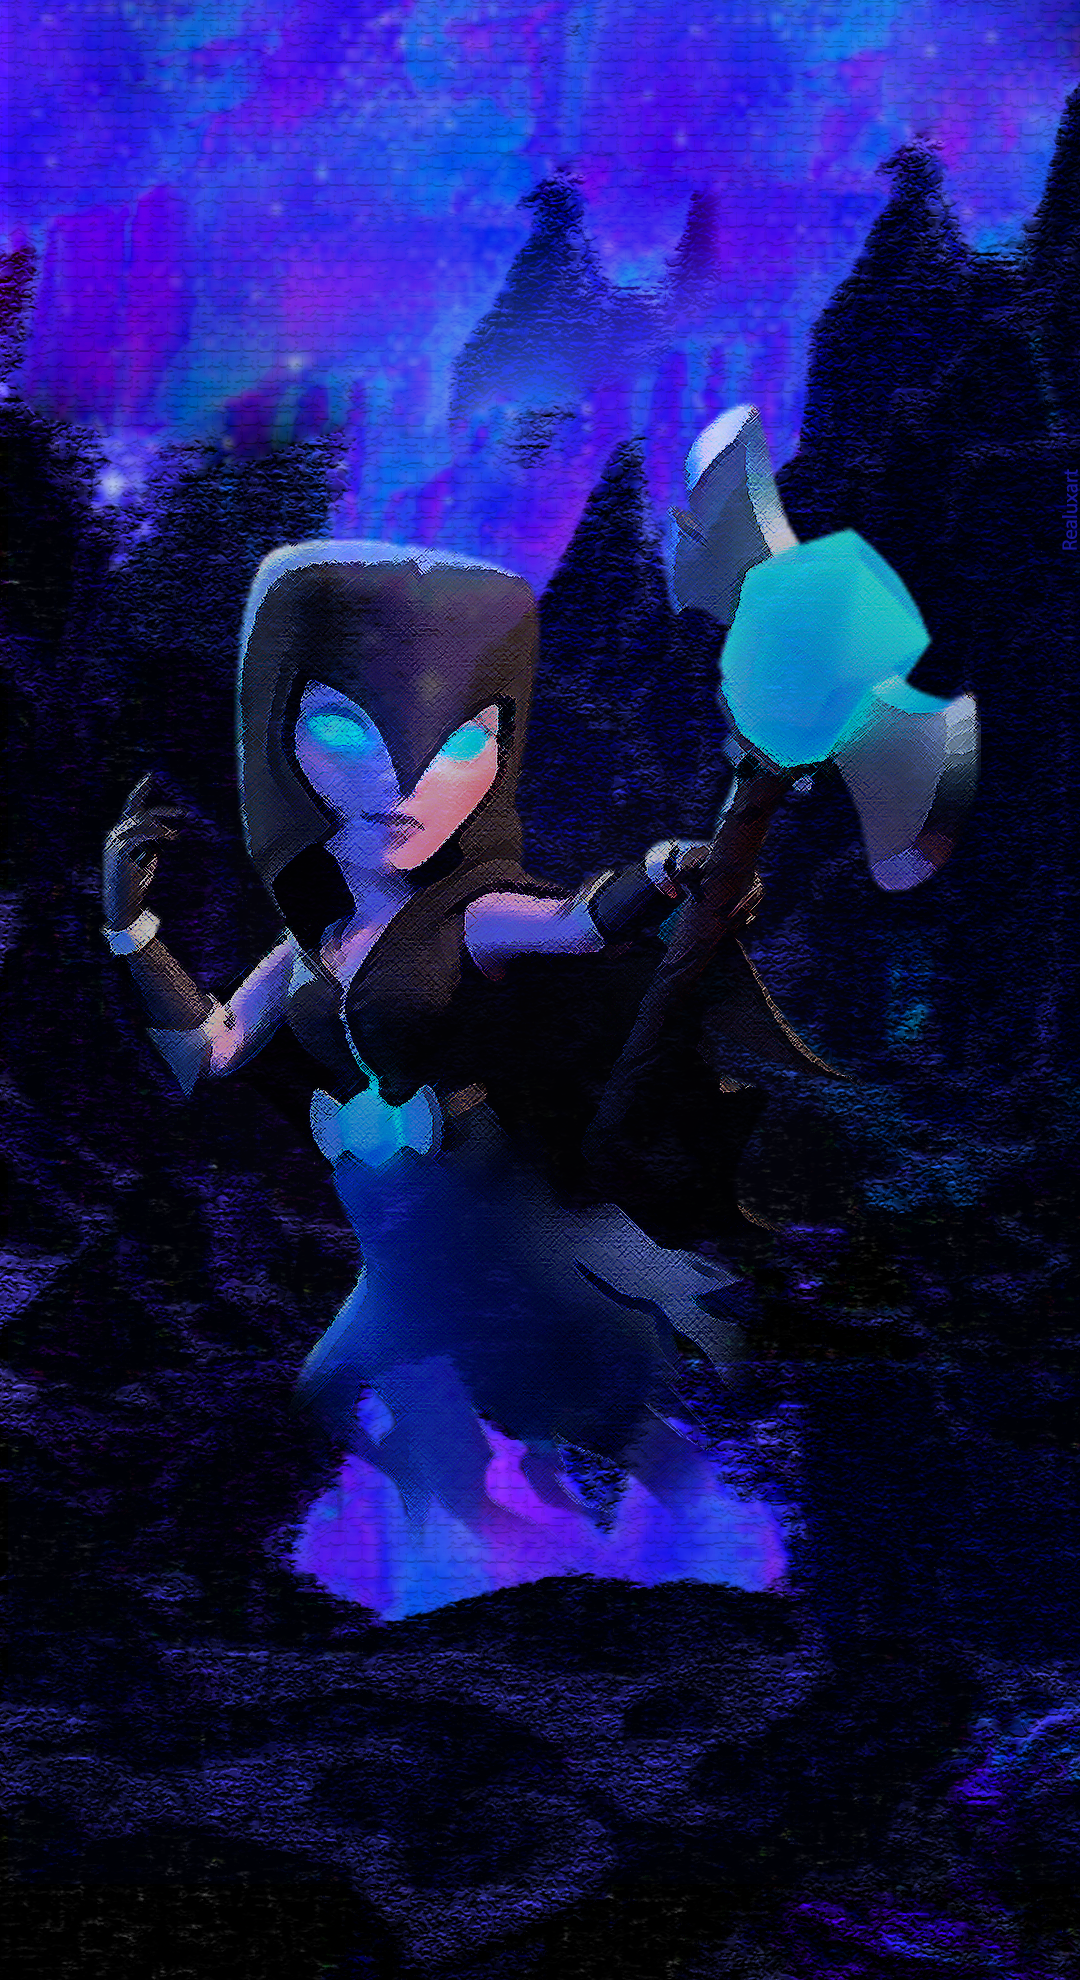 Night Witch wallpaper by Realuxart (me)! Thank you everyone who requested for it